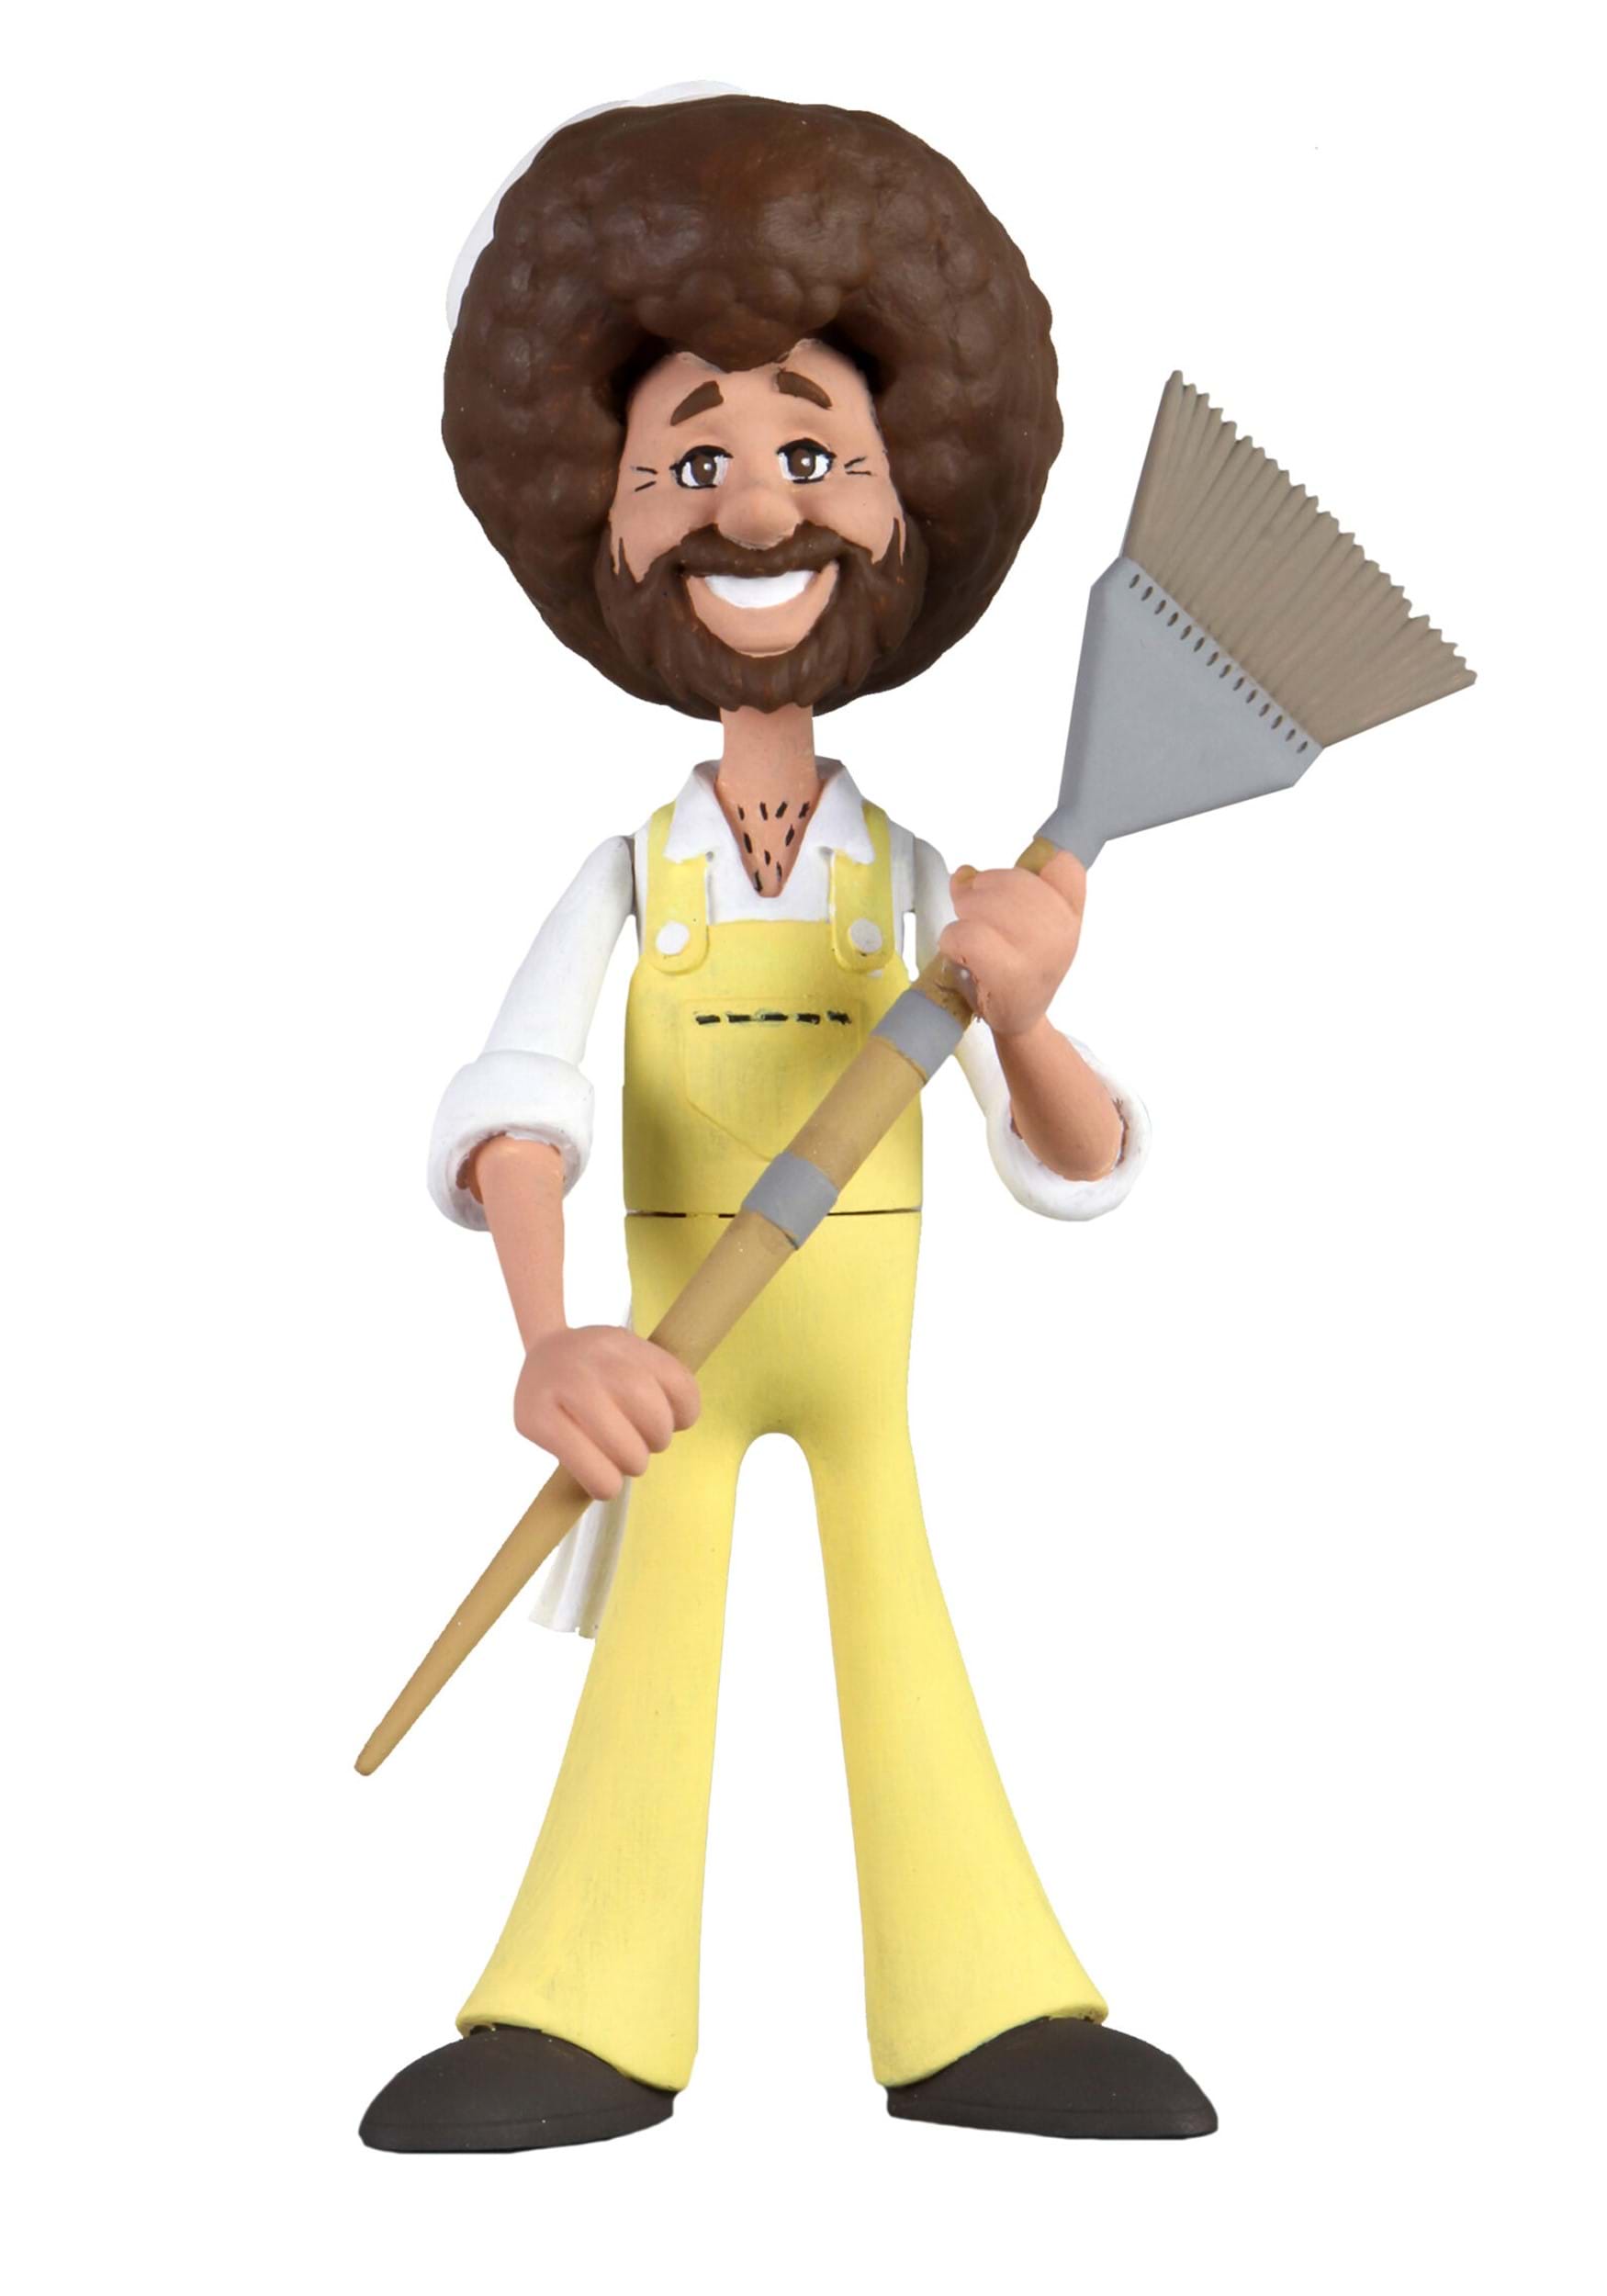 Bob Ross in Overalls Toony Classic 6" Scale Action Figure